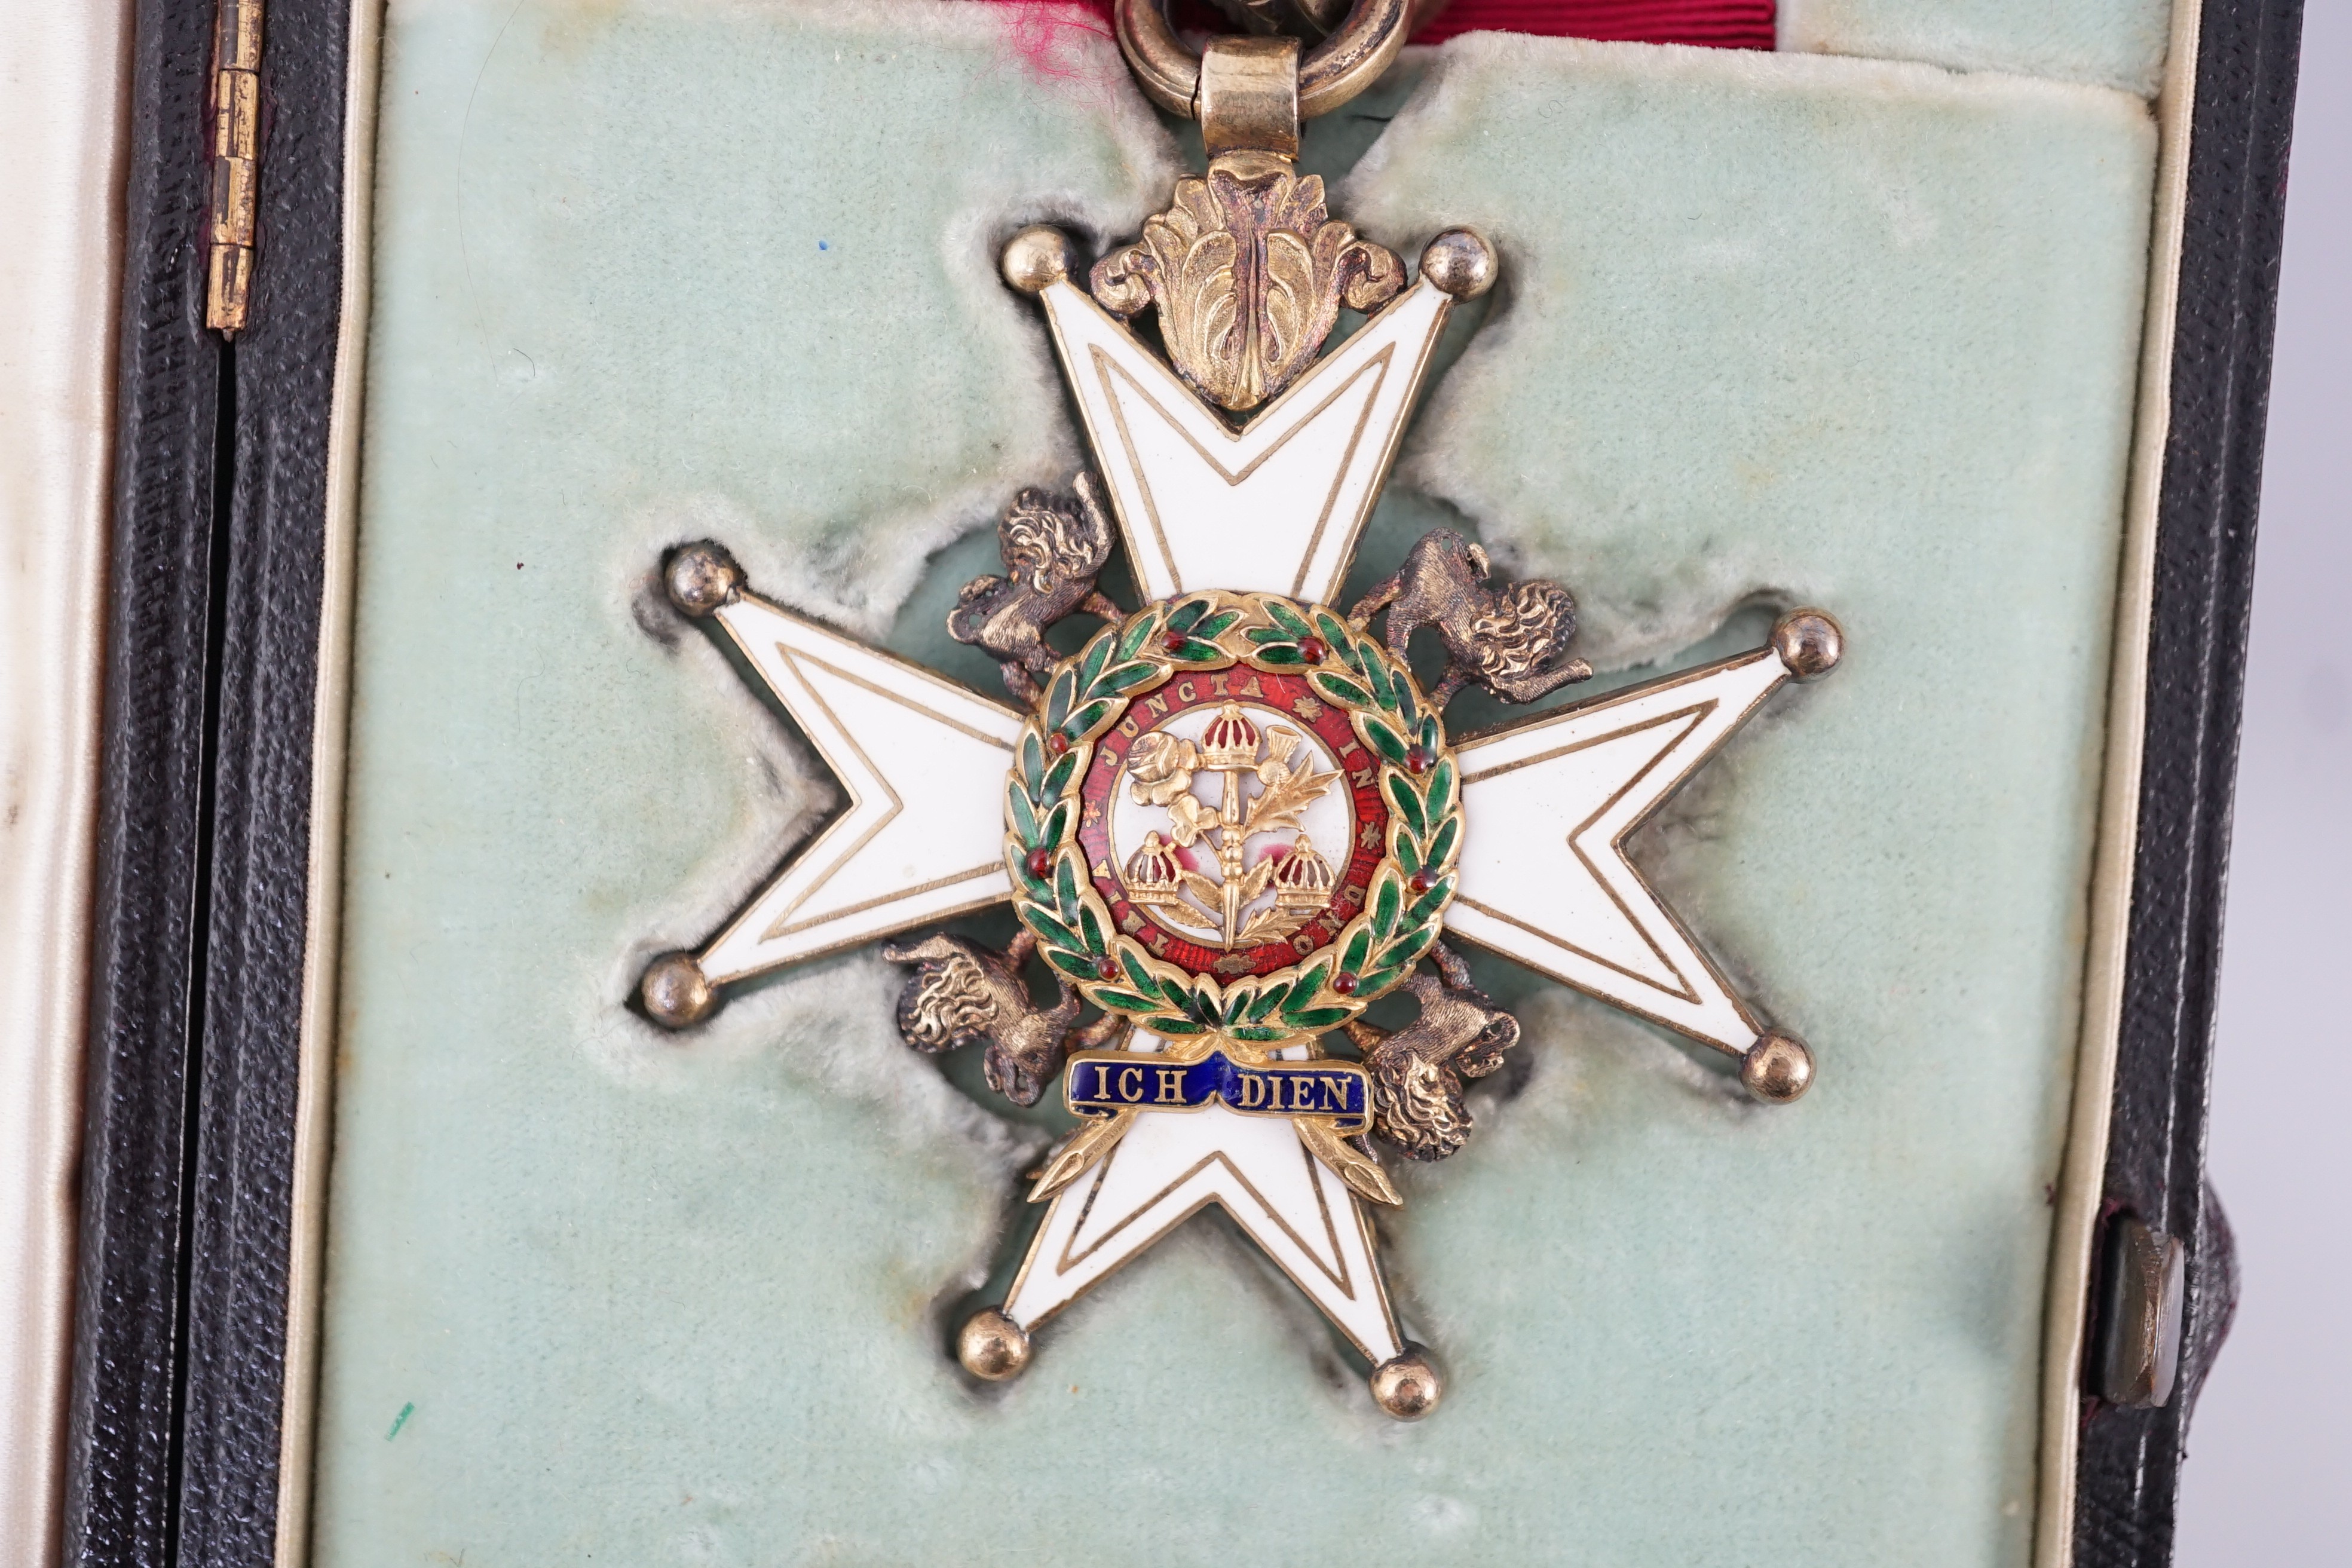 A magnificent group of Afghanistan, Indian General Service, Boer War, and Great War of eleven medals, awarded to General Sir John Eccles Nixon, GCMG KCB, who was the General responsible for the disastrous first British E